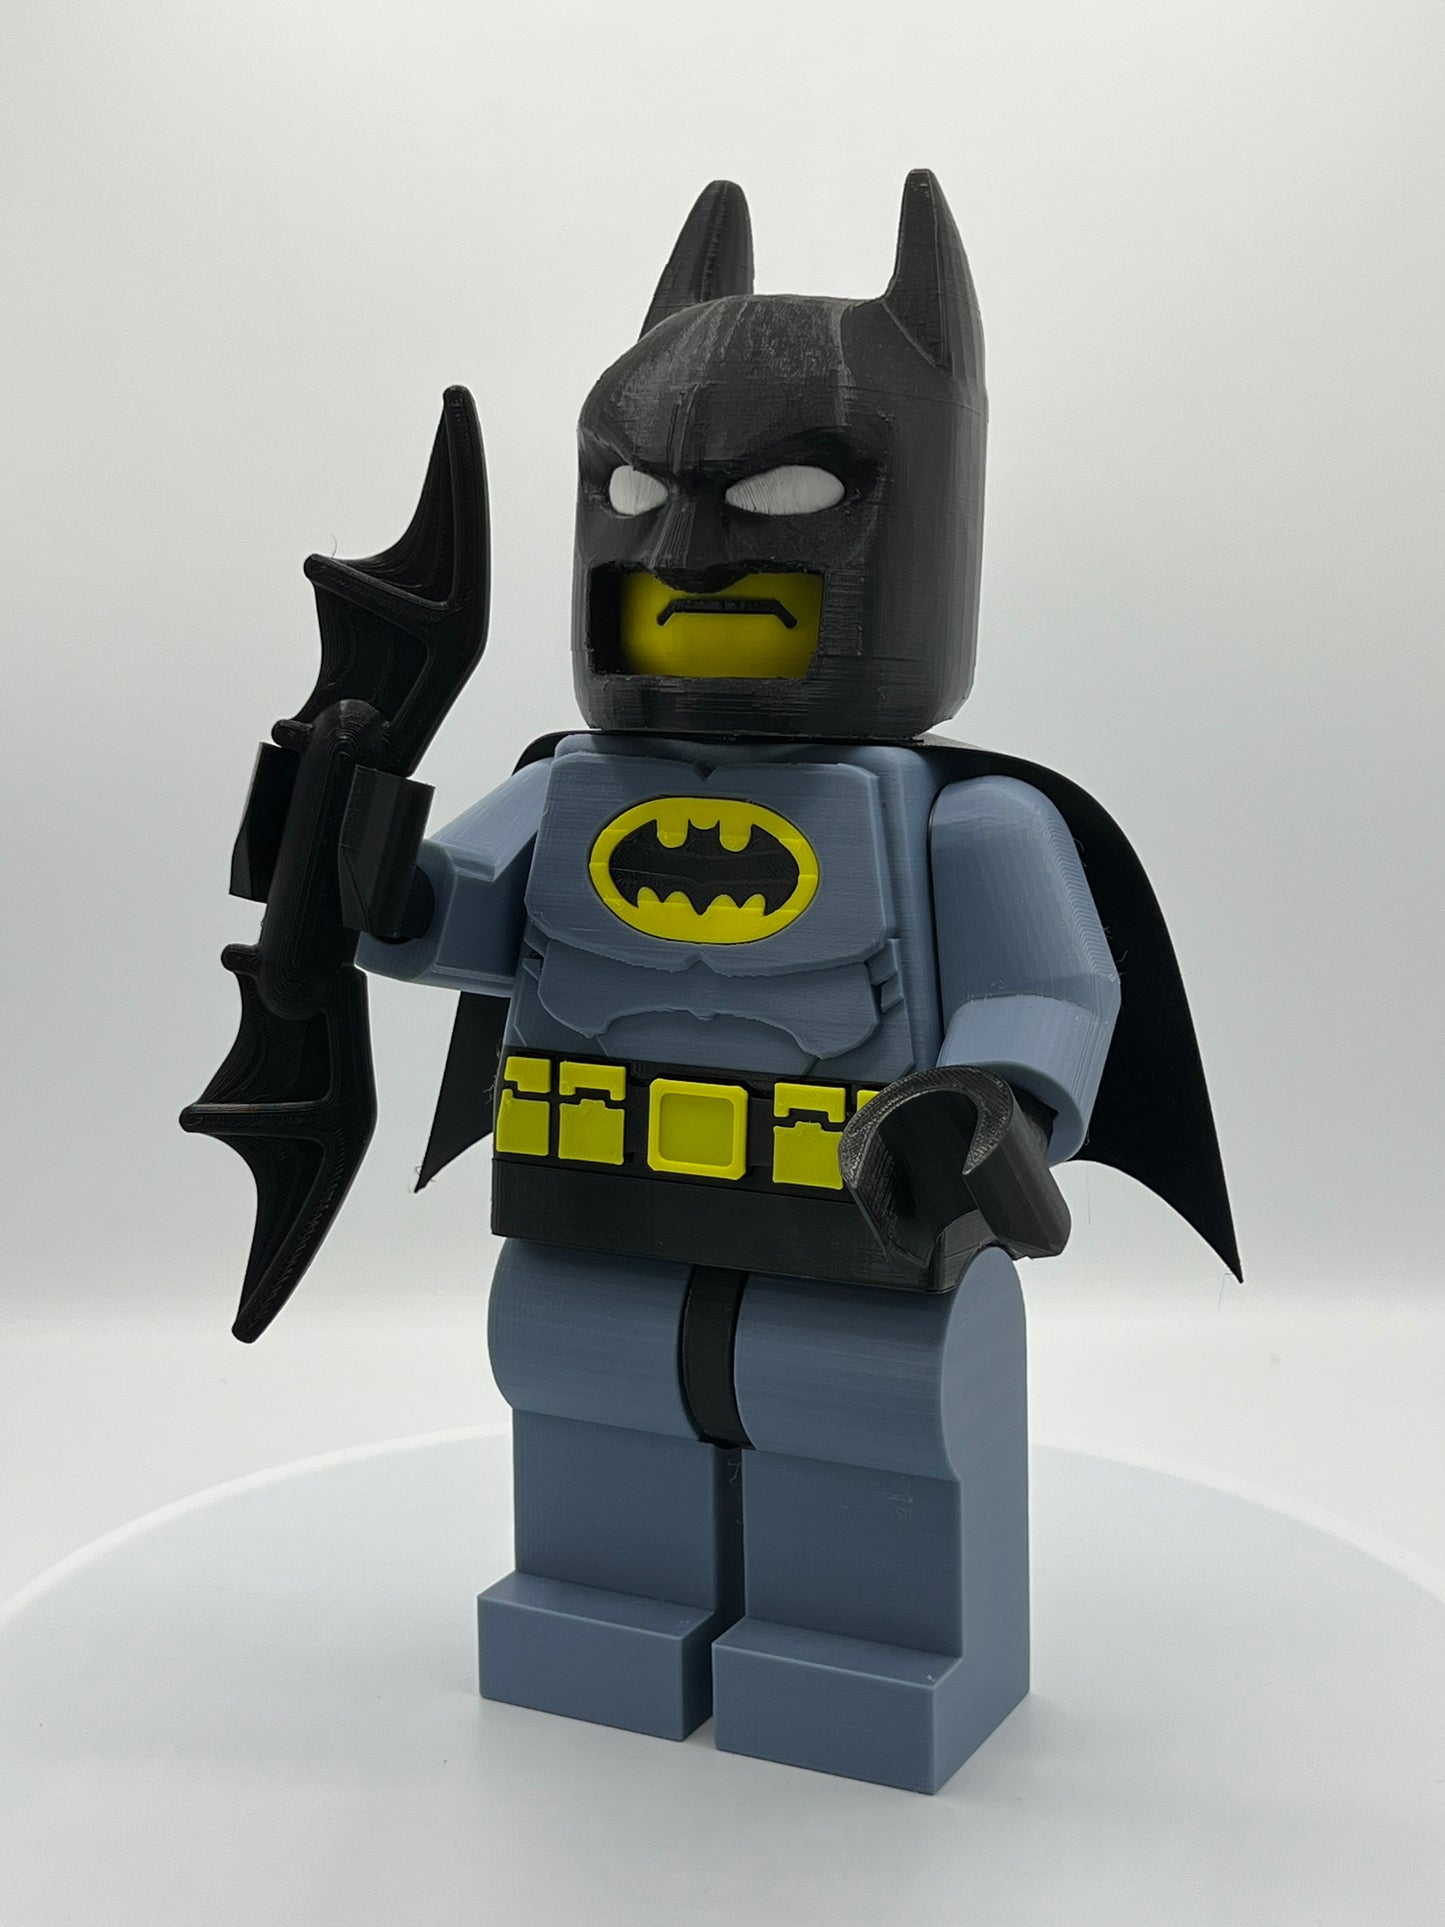 The Guardian of Gotham City